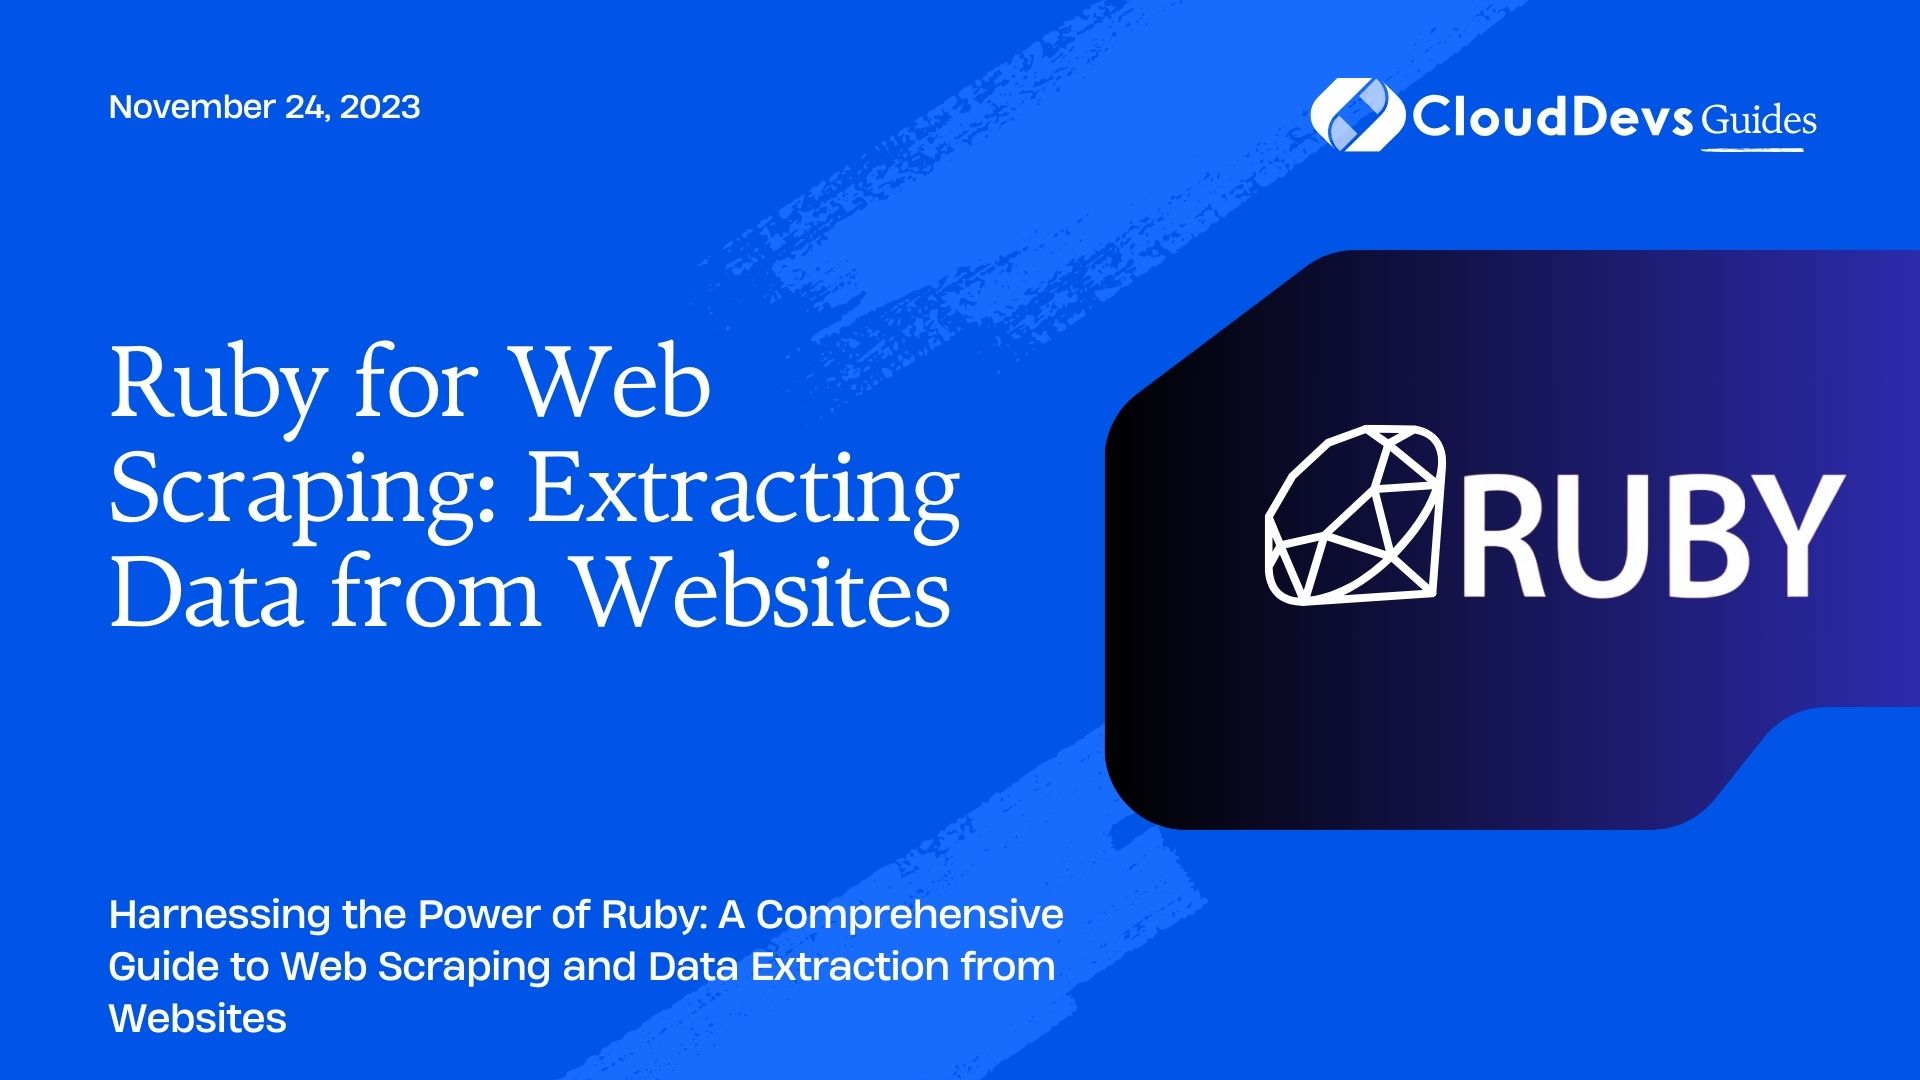 Ruby for Web Scraping: Extracting Data from Websites